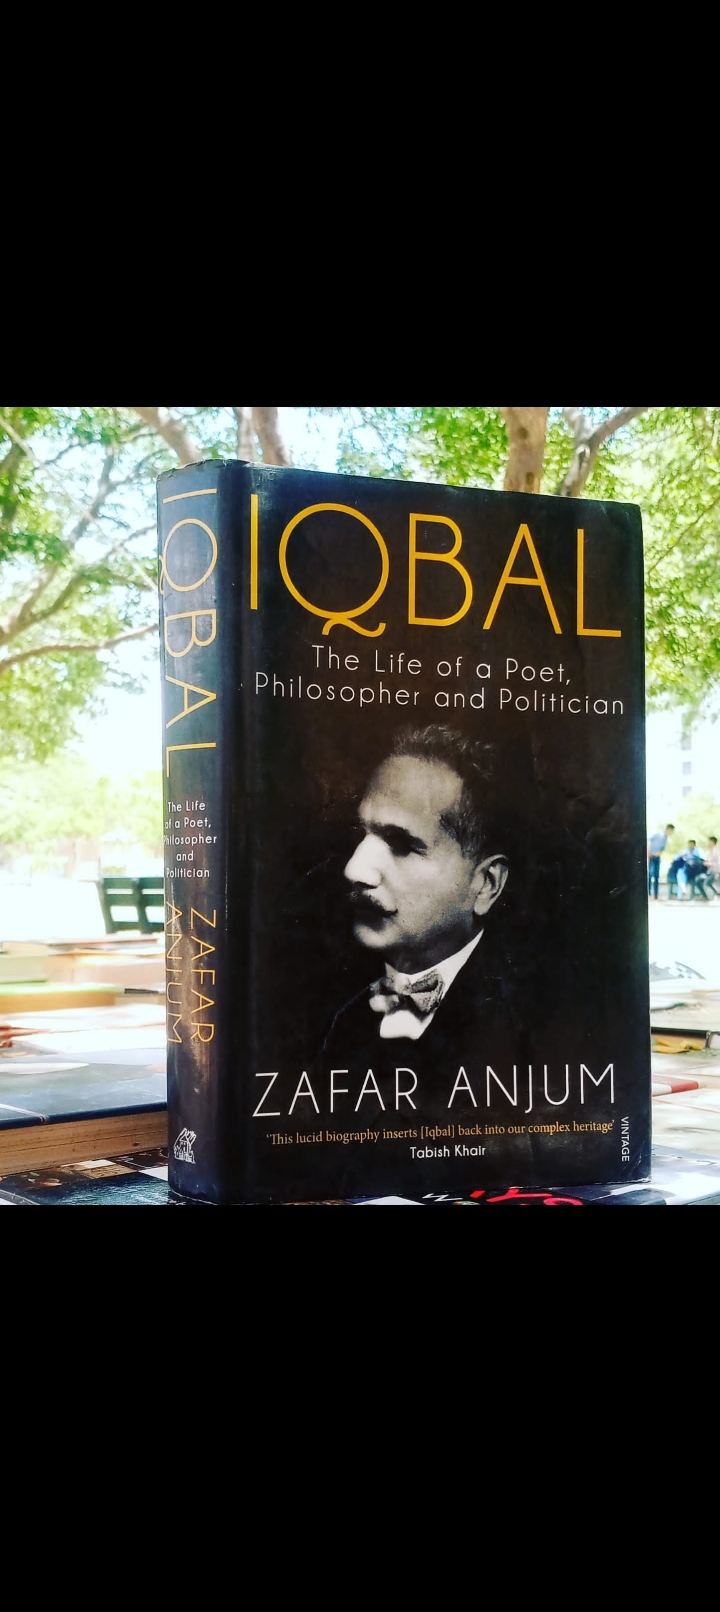 iqbal the life of a poet, philosopher and politician by zafar anjum. original hardcover